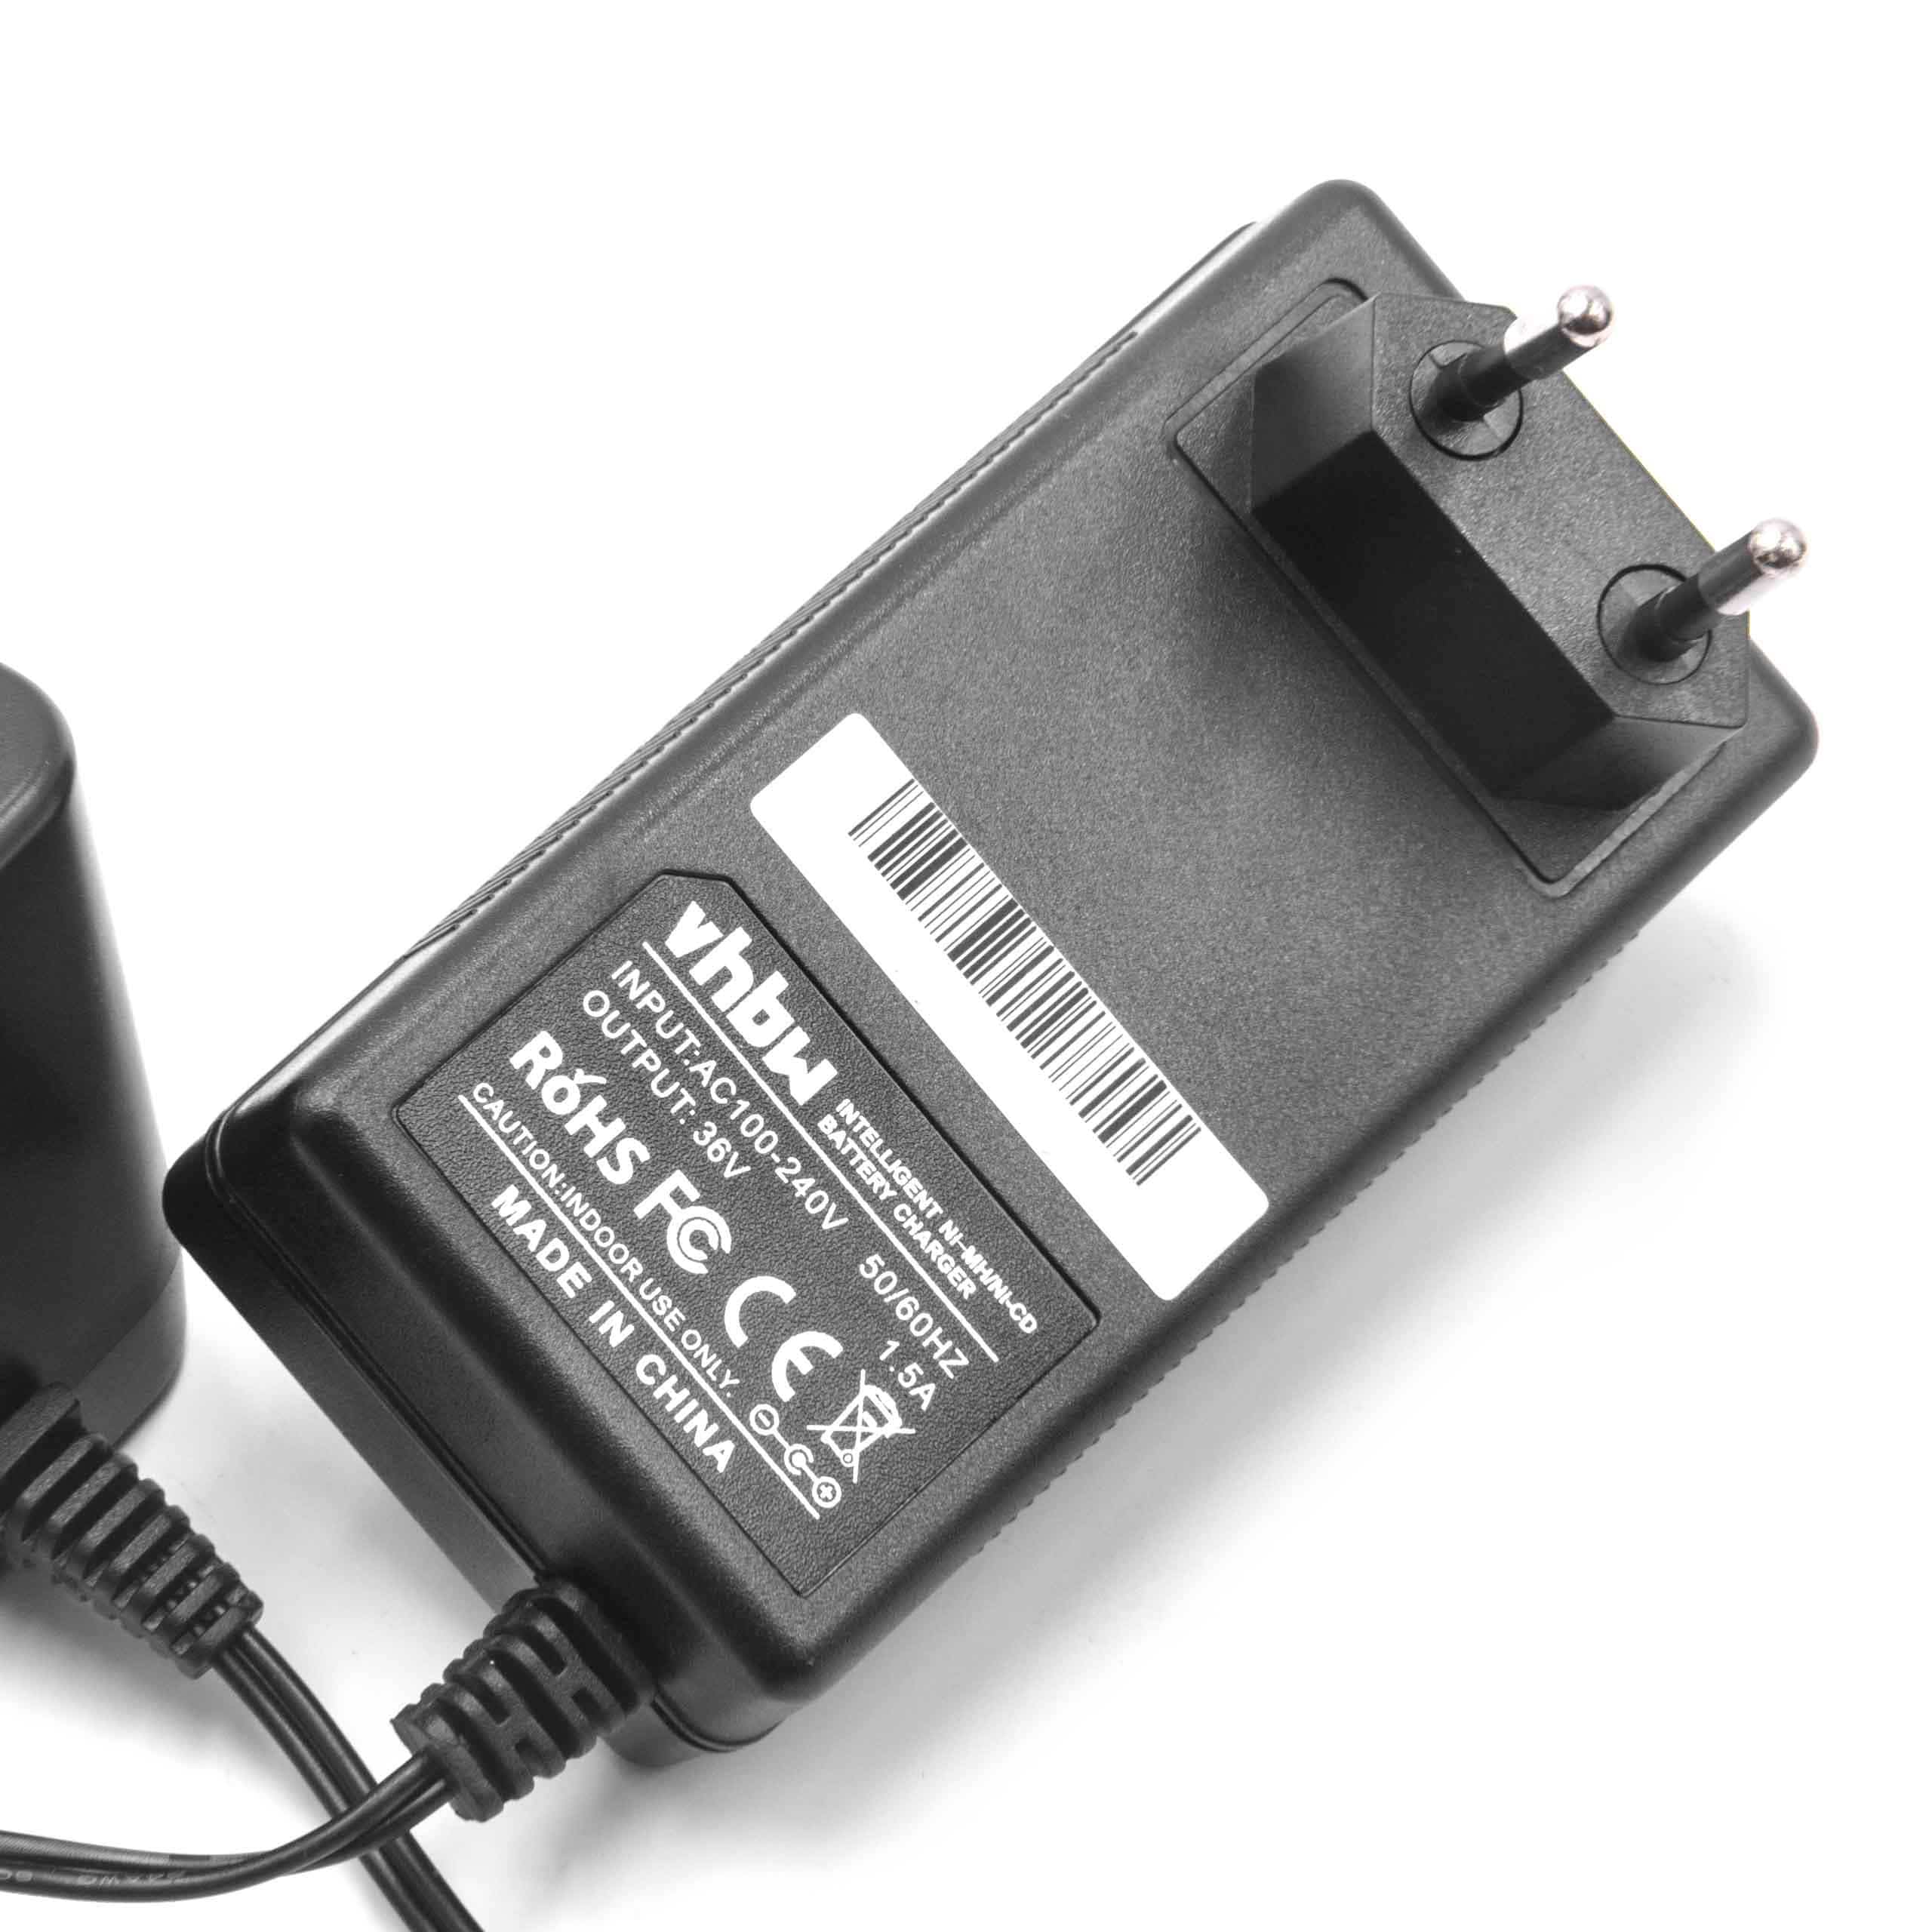 Charger suitable for BACS 12V BernerPower Tool Batteries etc. Ni-Cd / NiMH